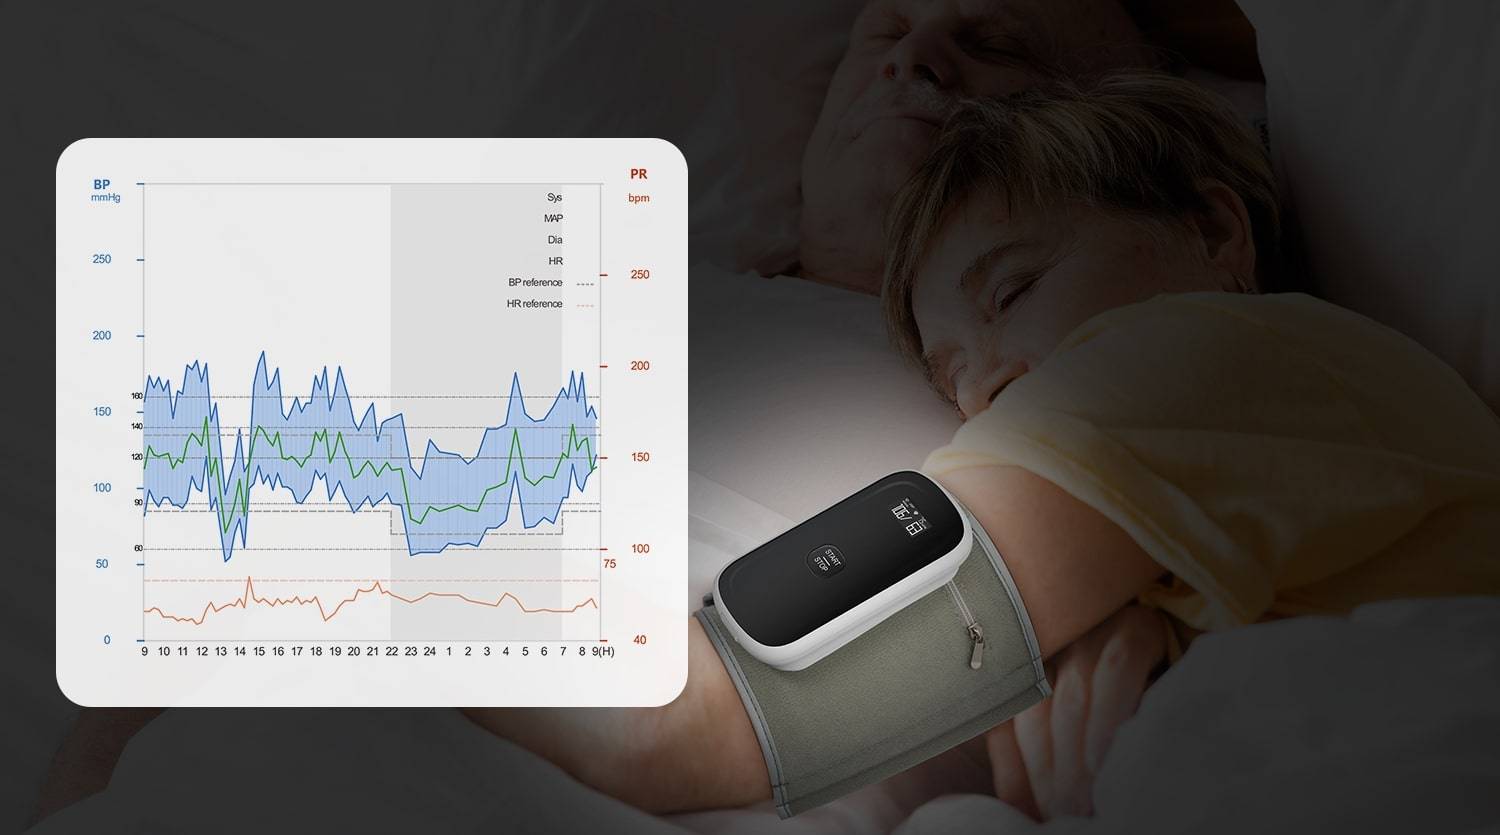 ABPM tracks blood pressure 24/7 and indicates the whole day's blood pressure fluctuation.